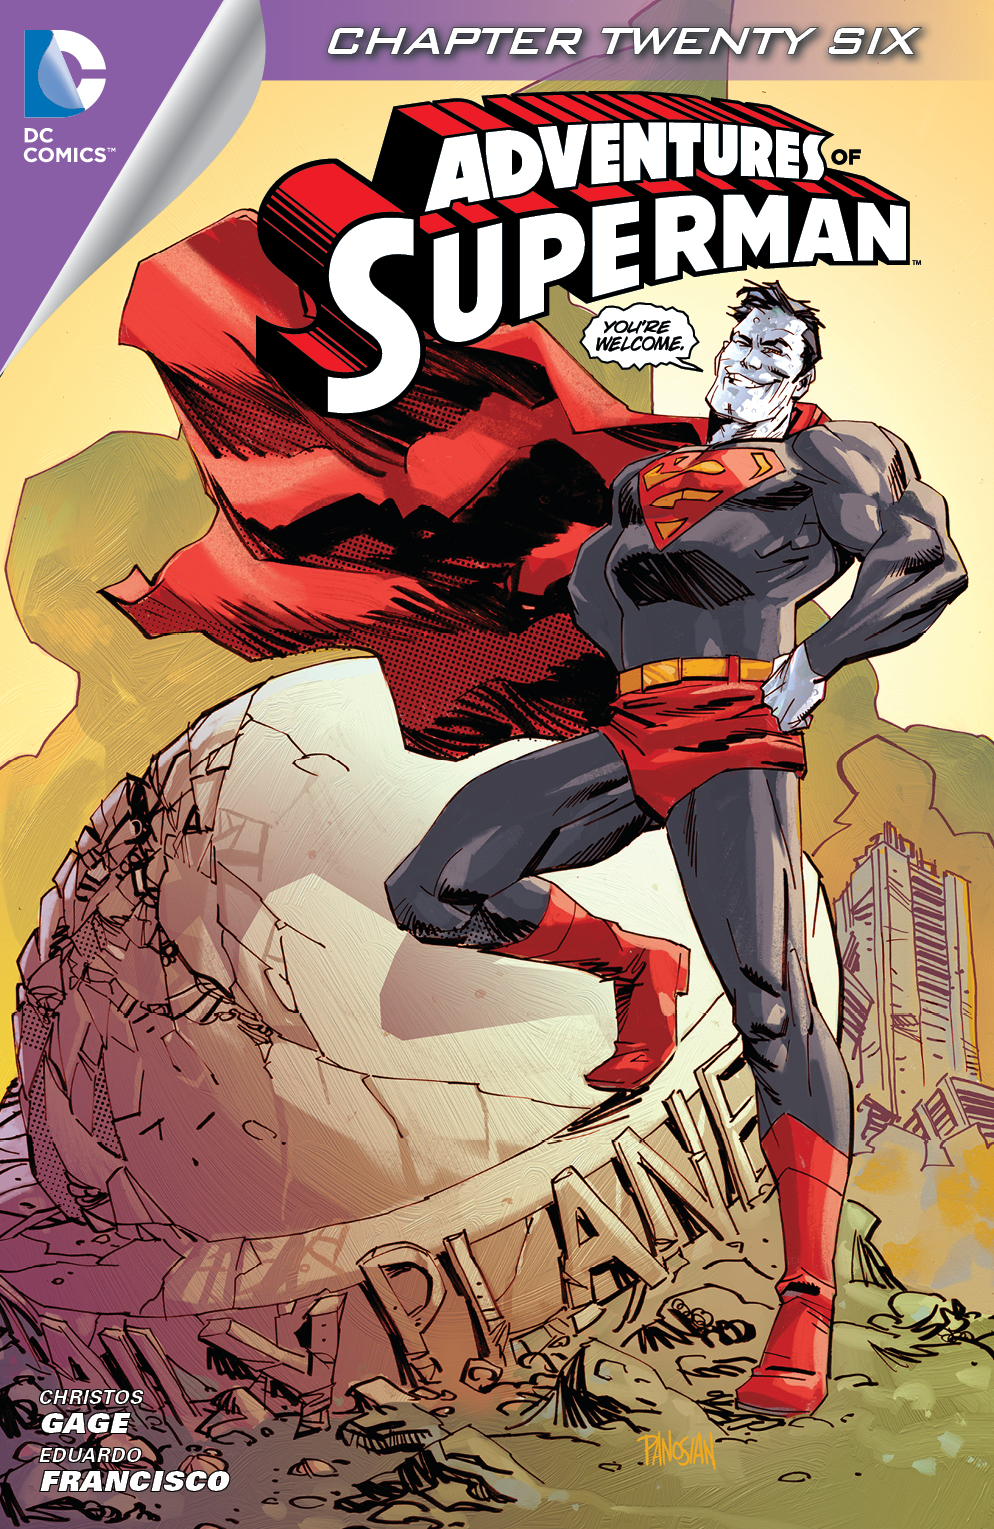 Adventures of Superman (2013-) #26 preview images